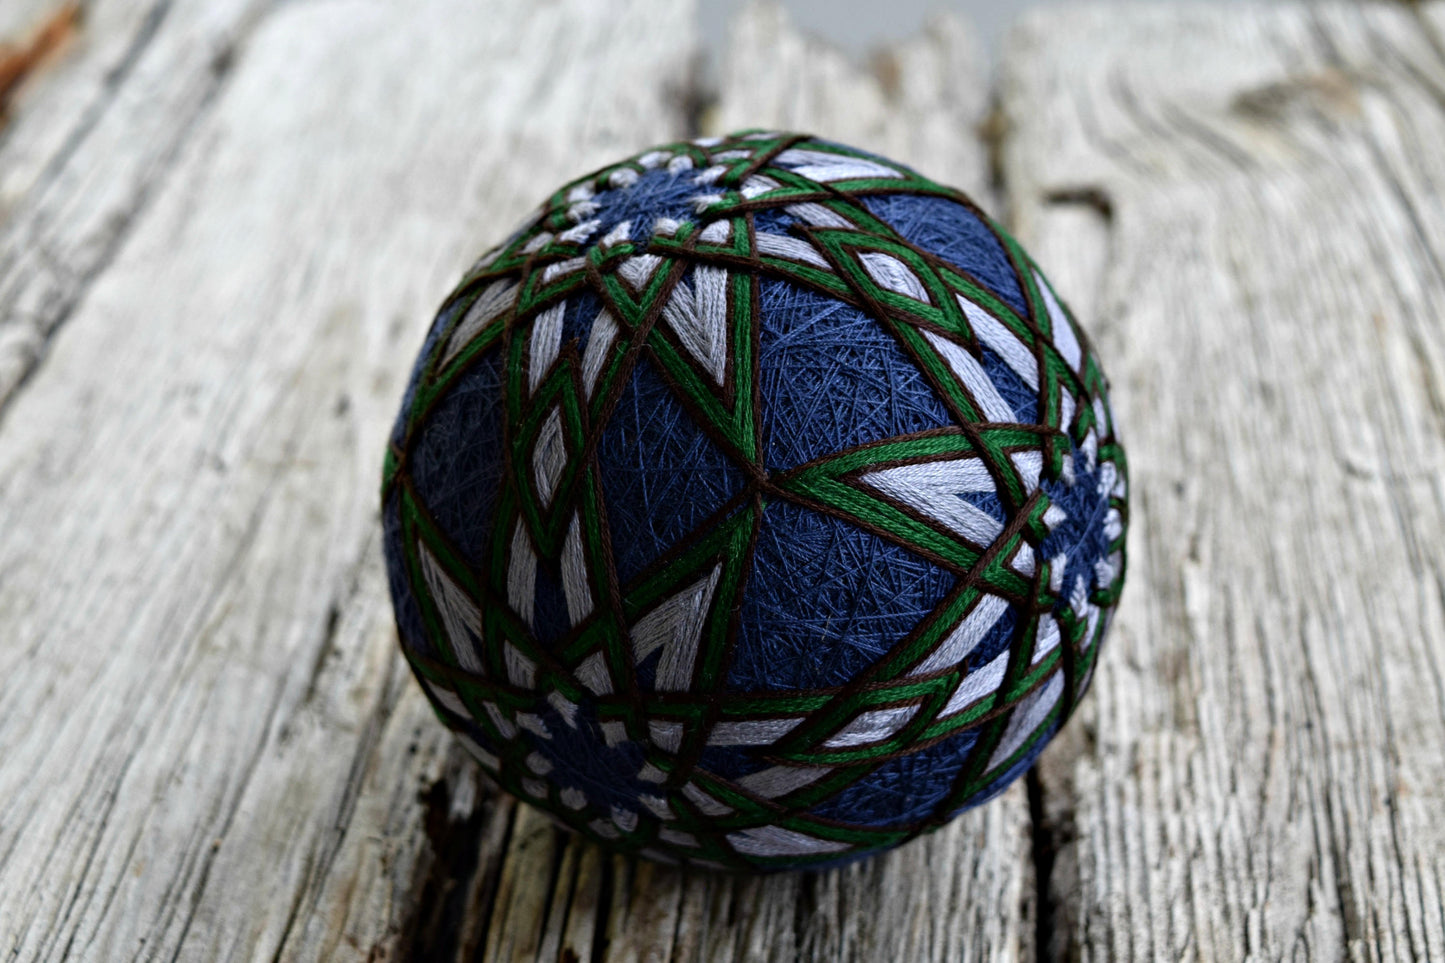 Blue, grey, and green temari showing intersection where star points meet